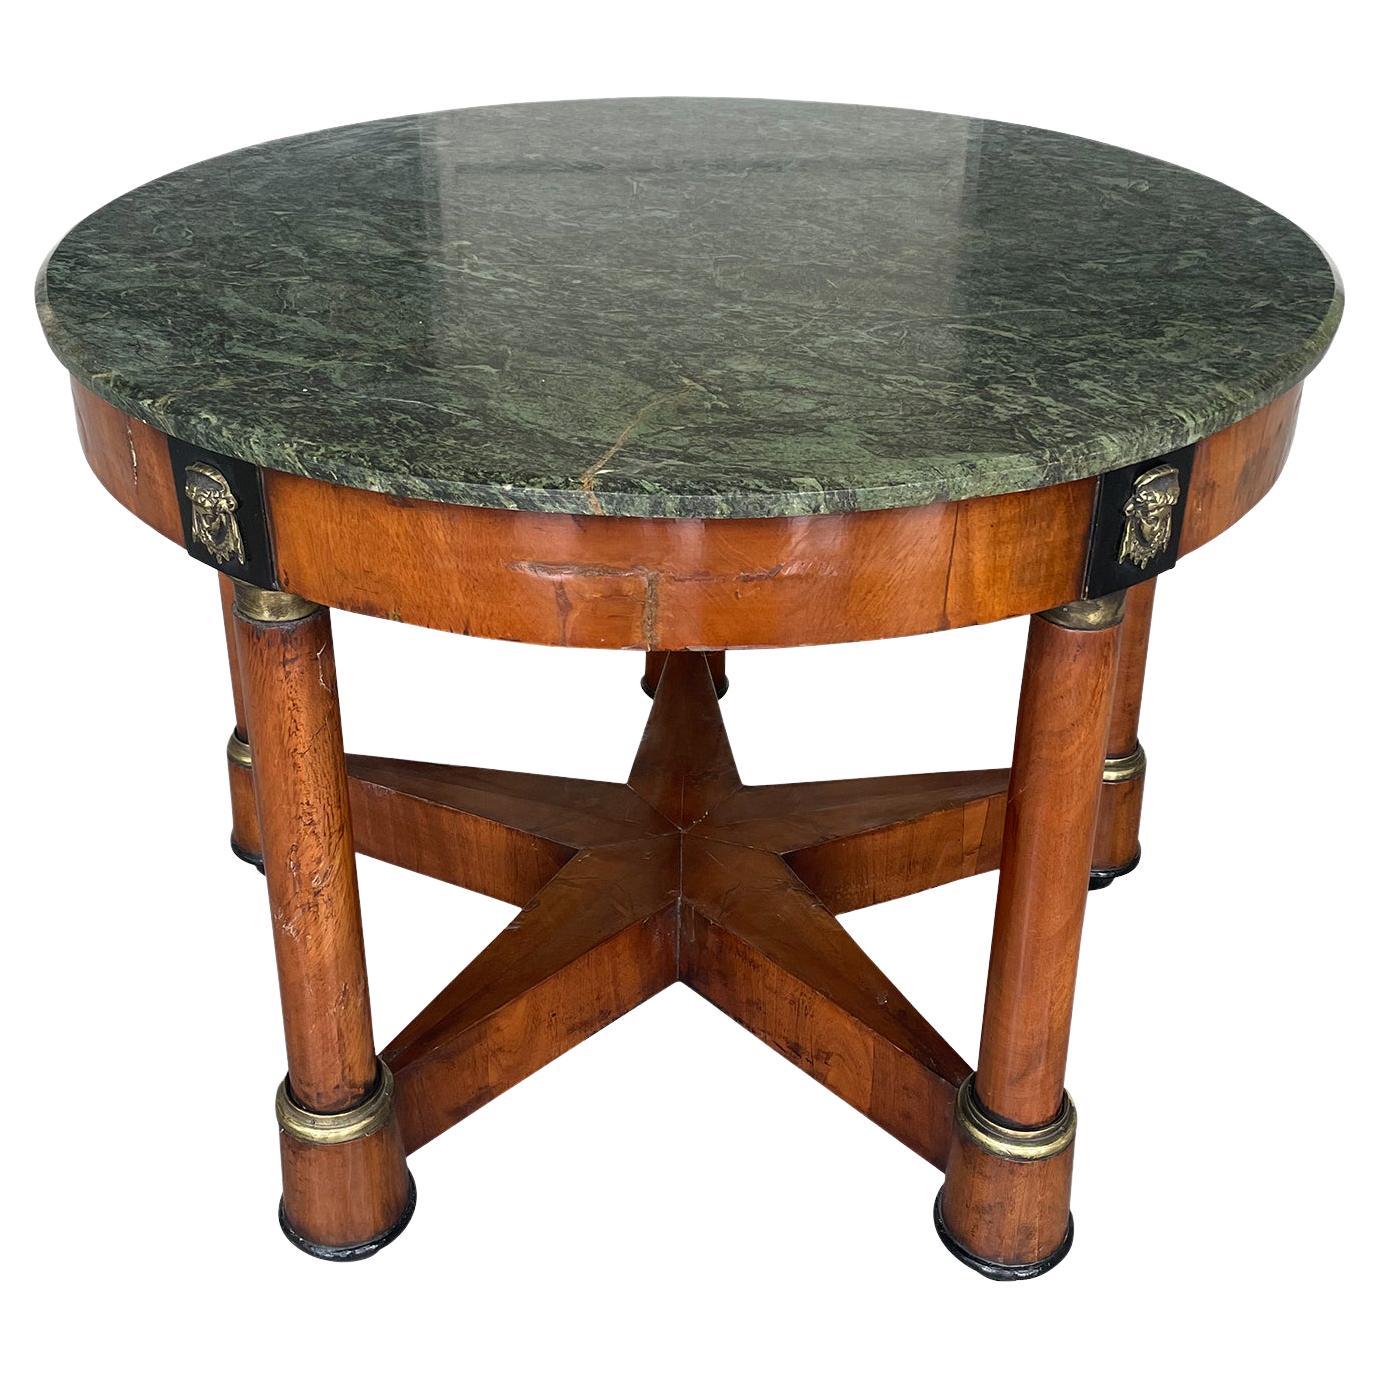 Antique Empire Style Marbletop Circular Table For Sale